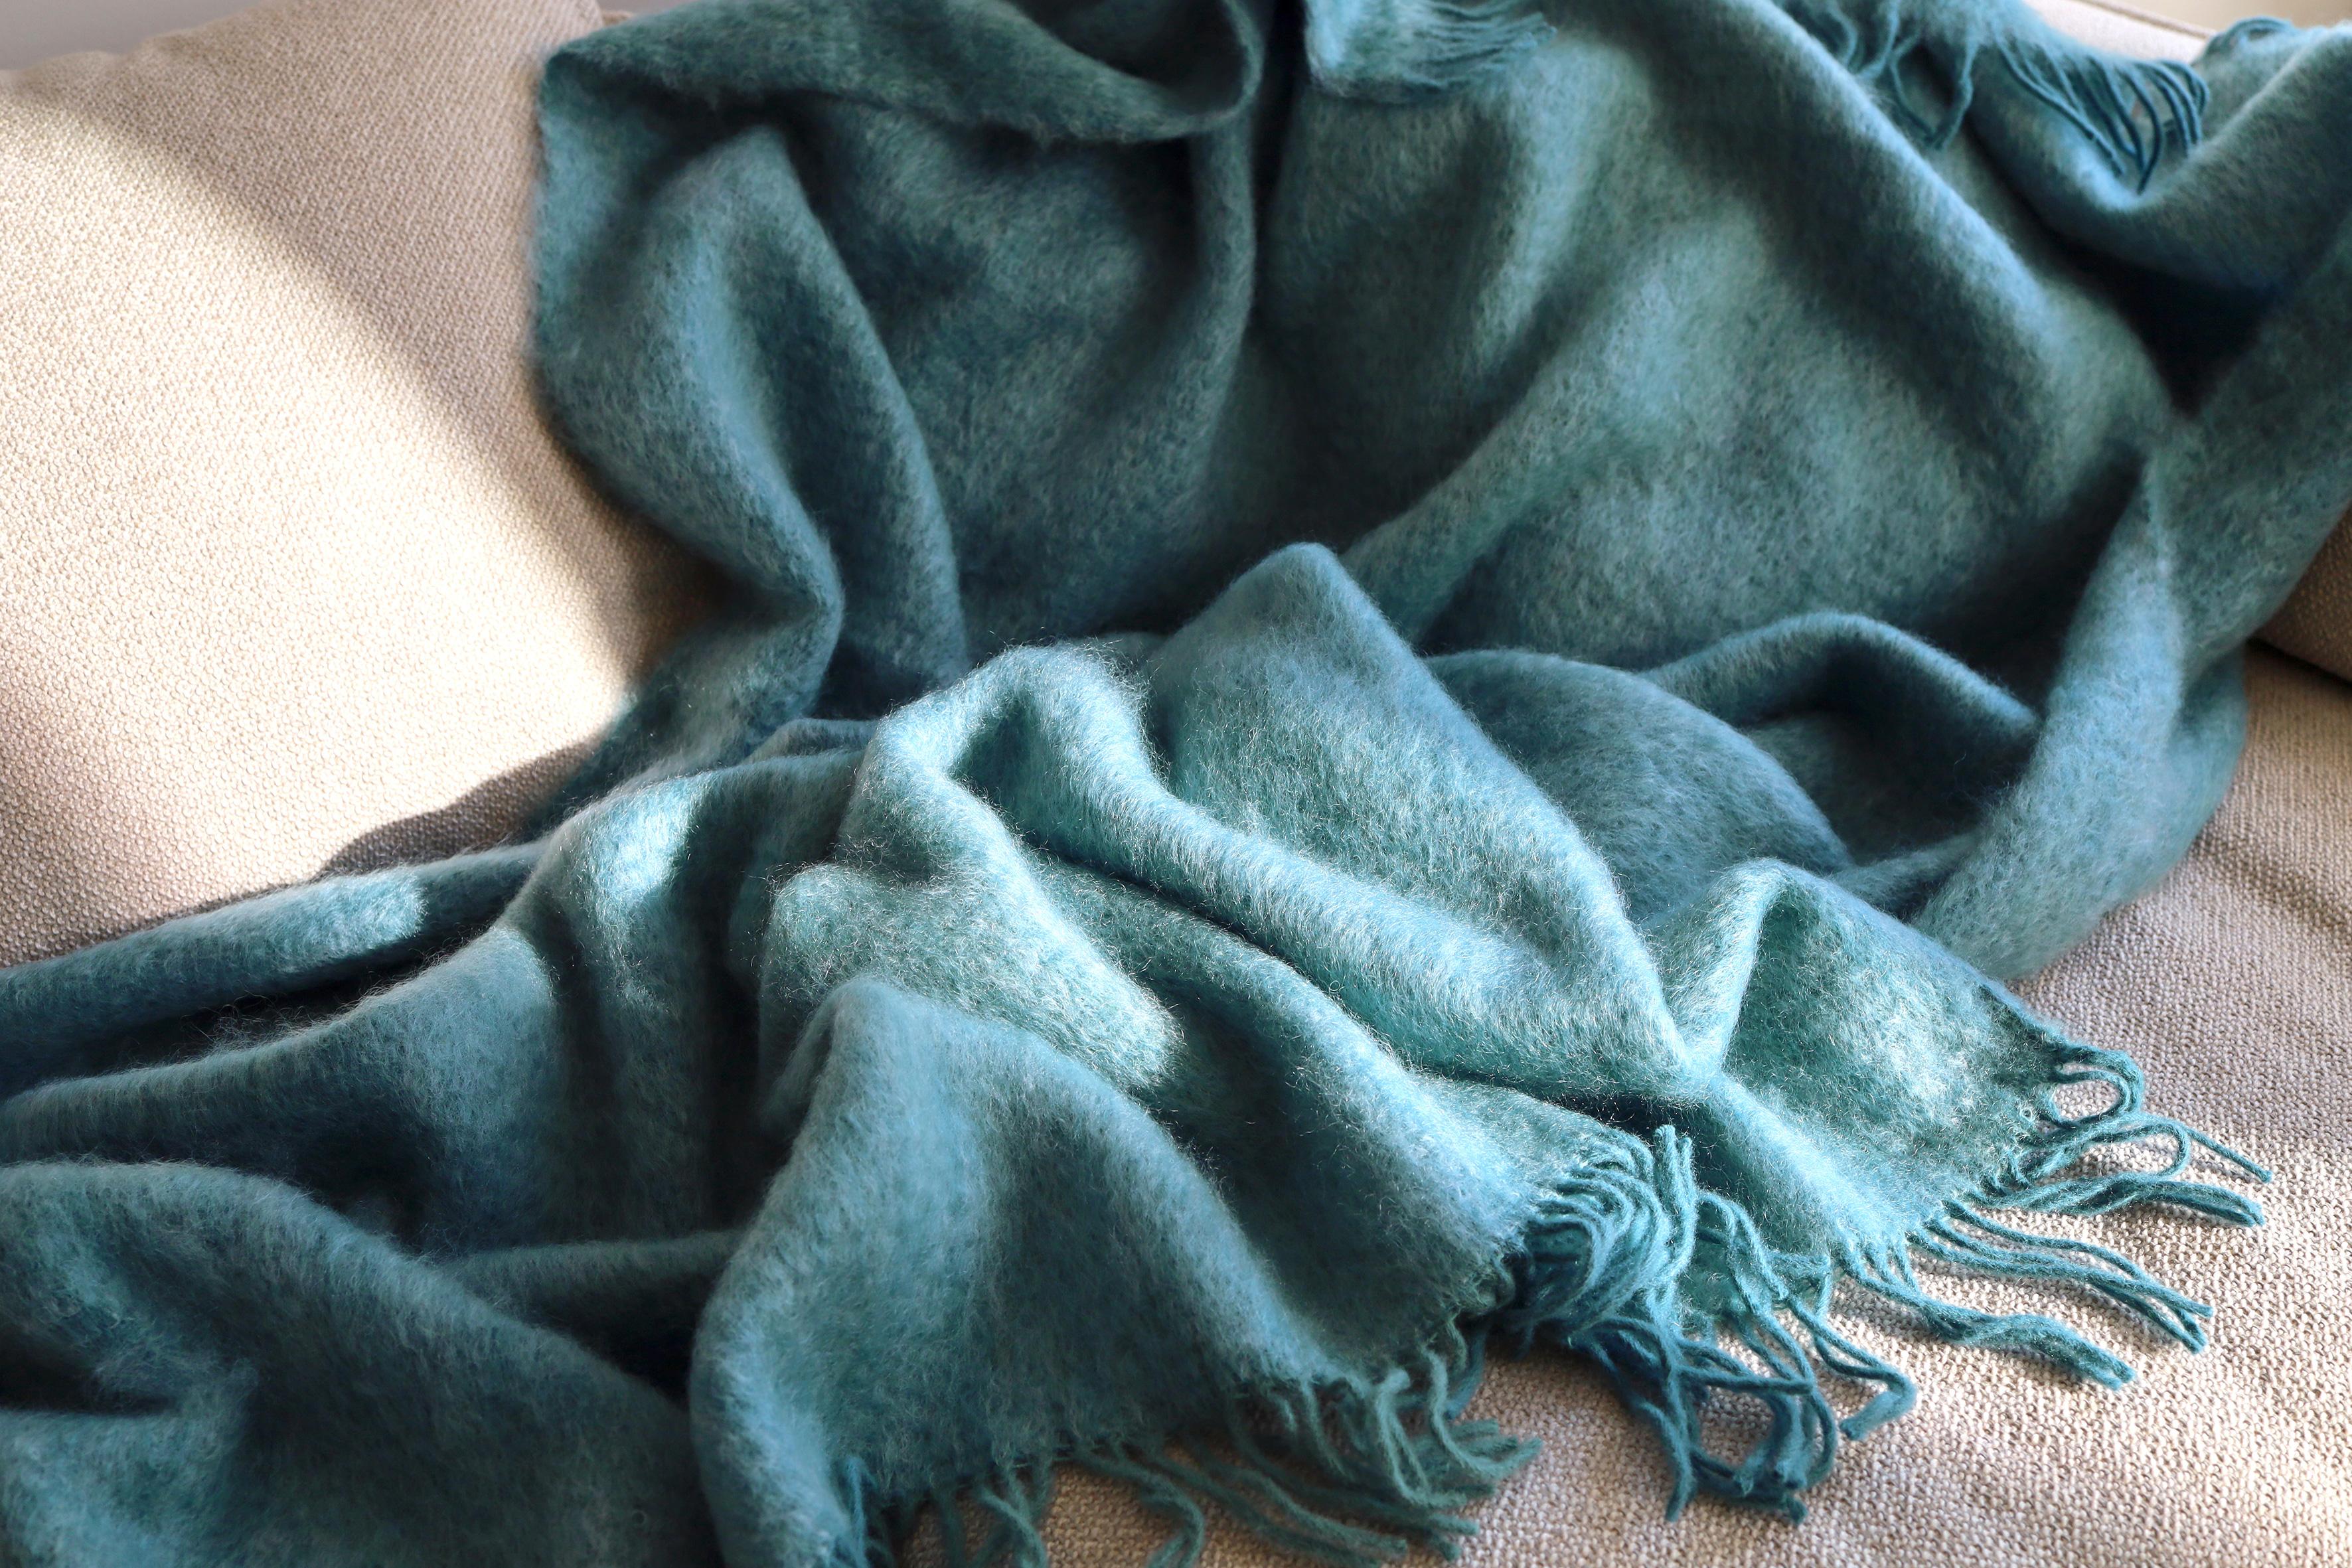 Designed in Berlin by Catharina Mende, woven of 50% mohair, 48% Wool, 2% polyamide in Spain: This Turquoise flattering and warming fluffy mohair blanket is the perfect companion for every season - an indispensable favorite for the home or the